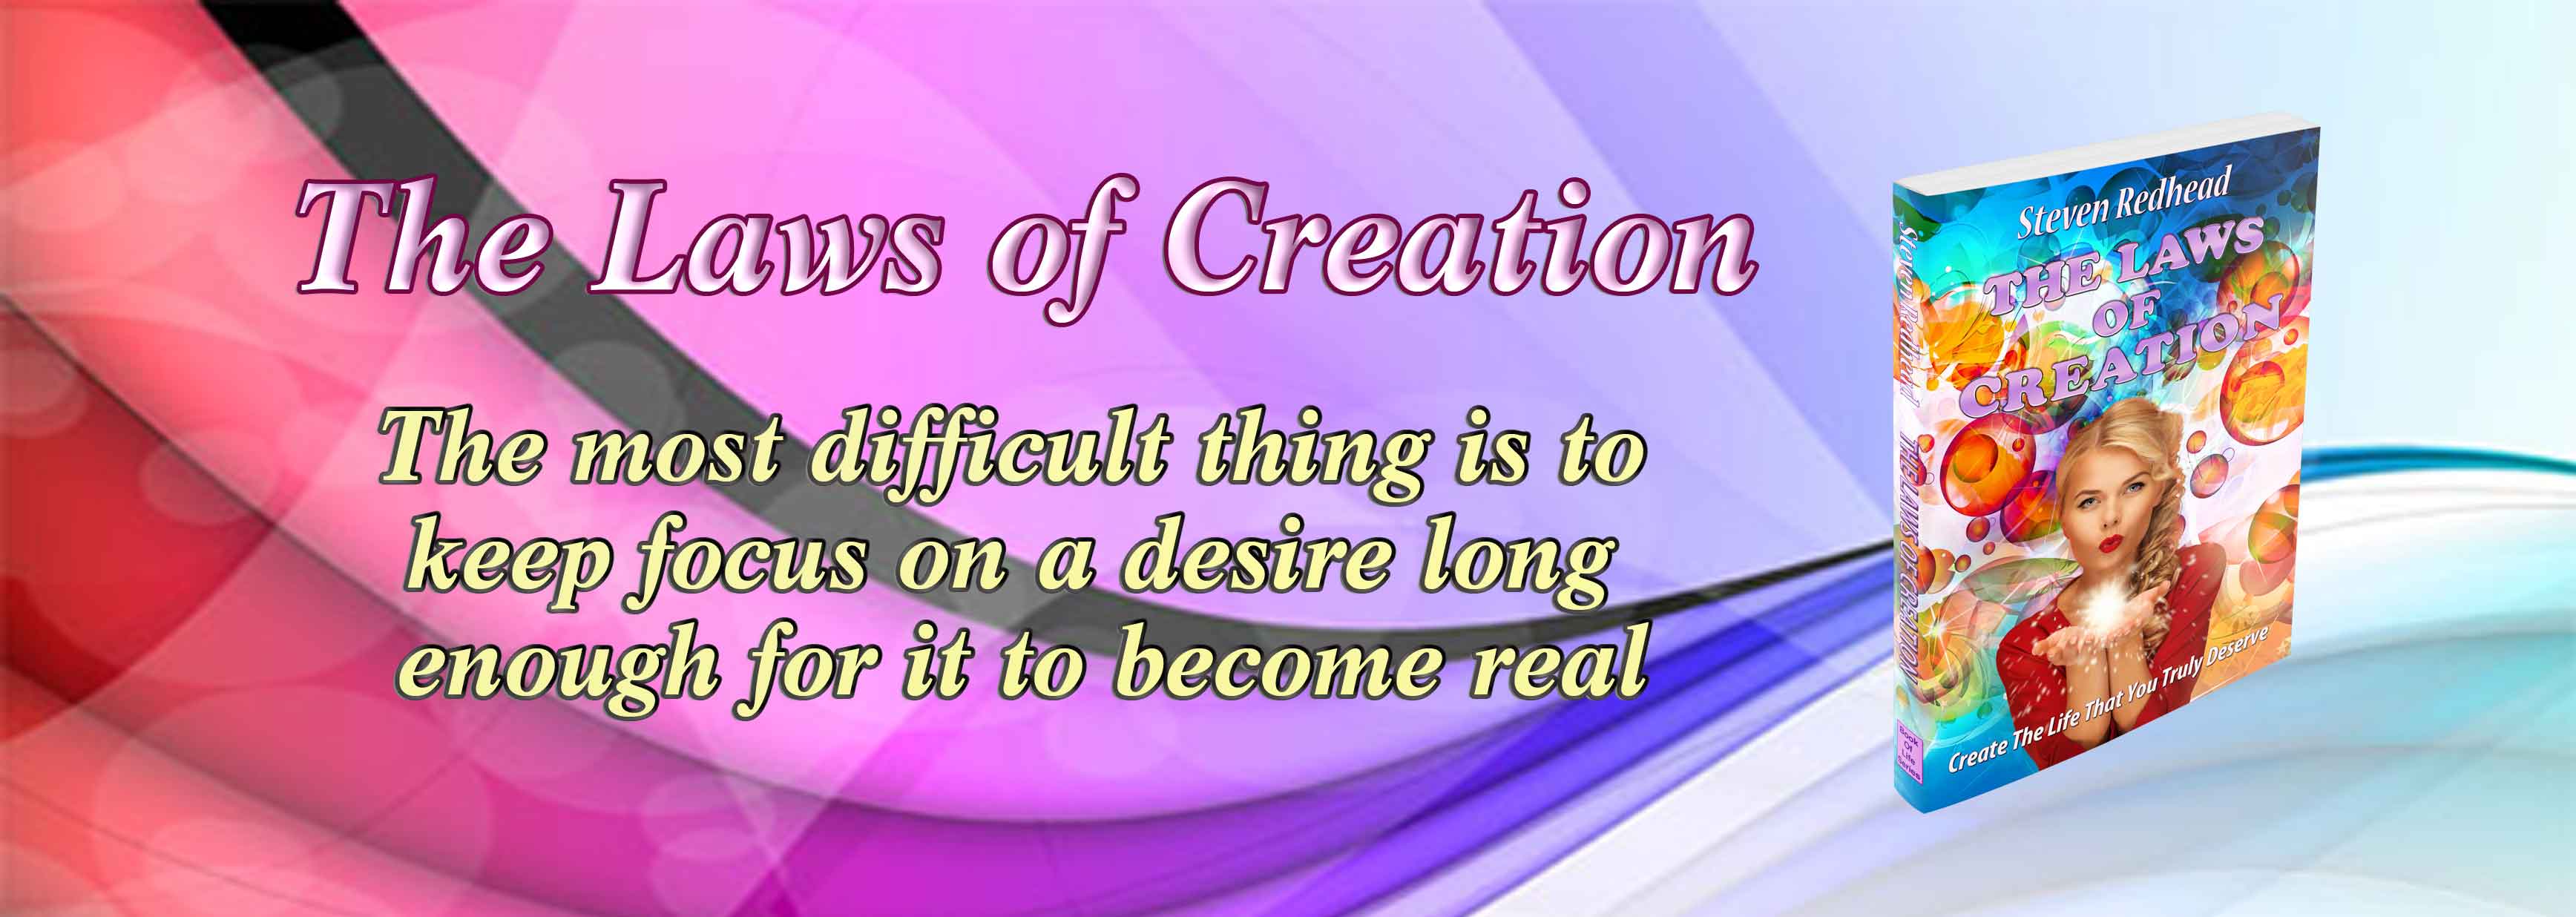 The Laws Of Creation Book Quote 